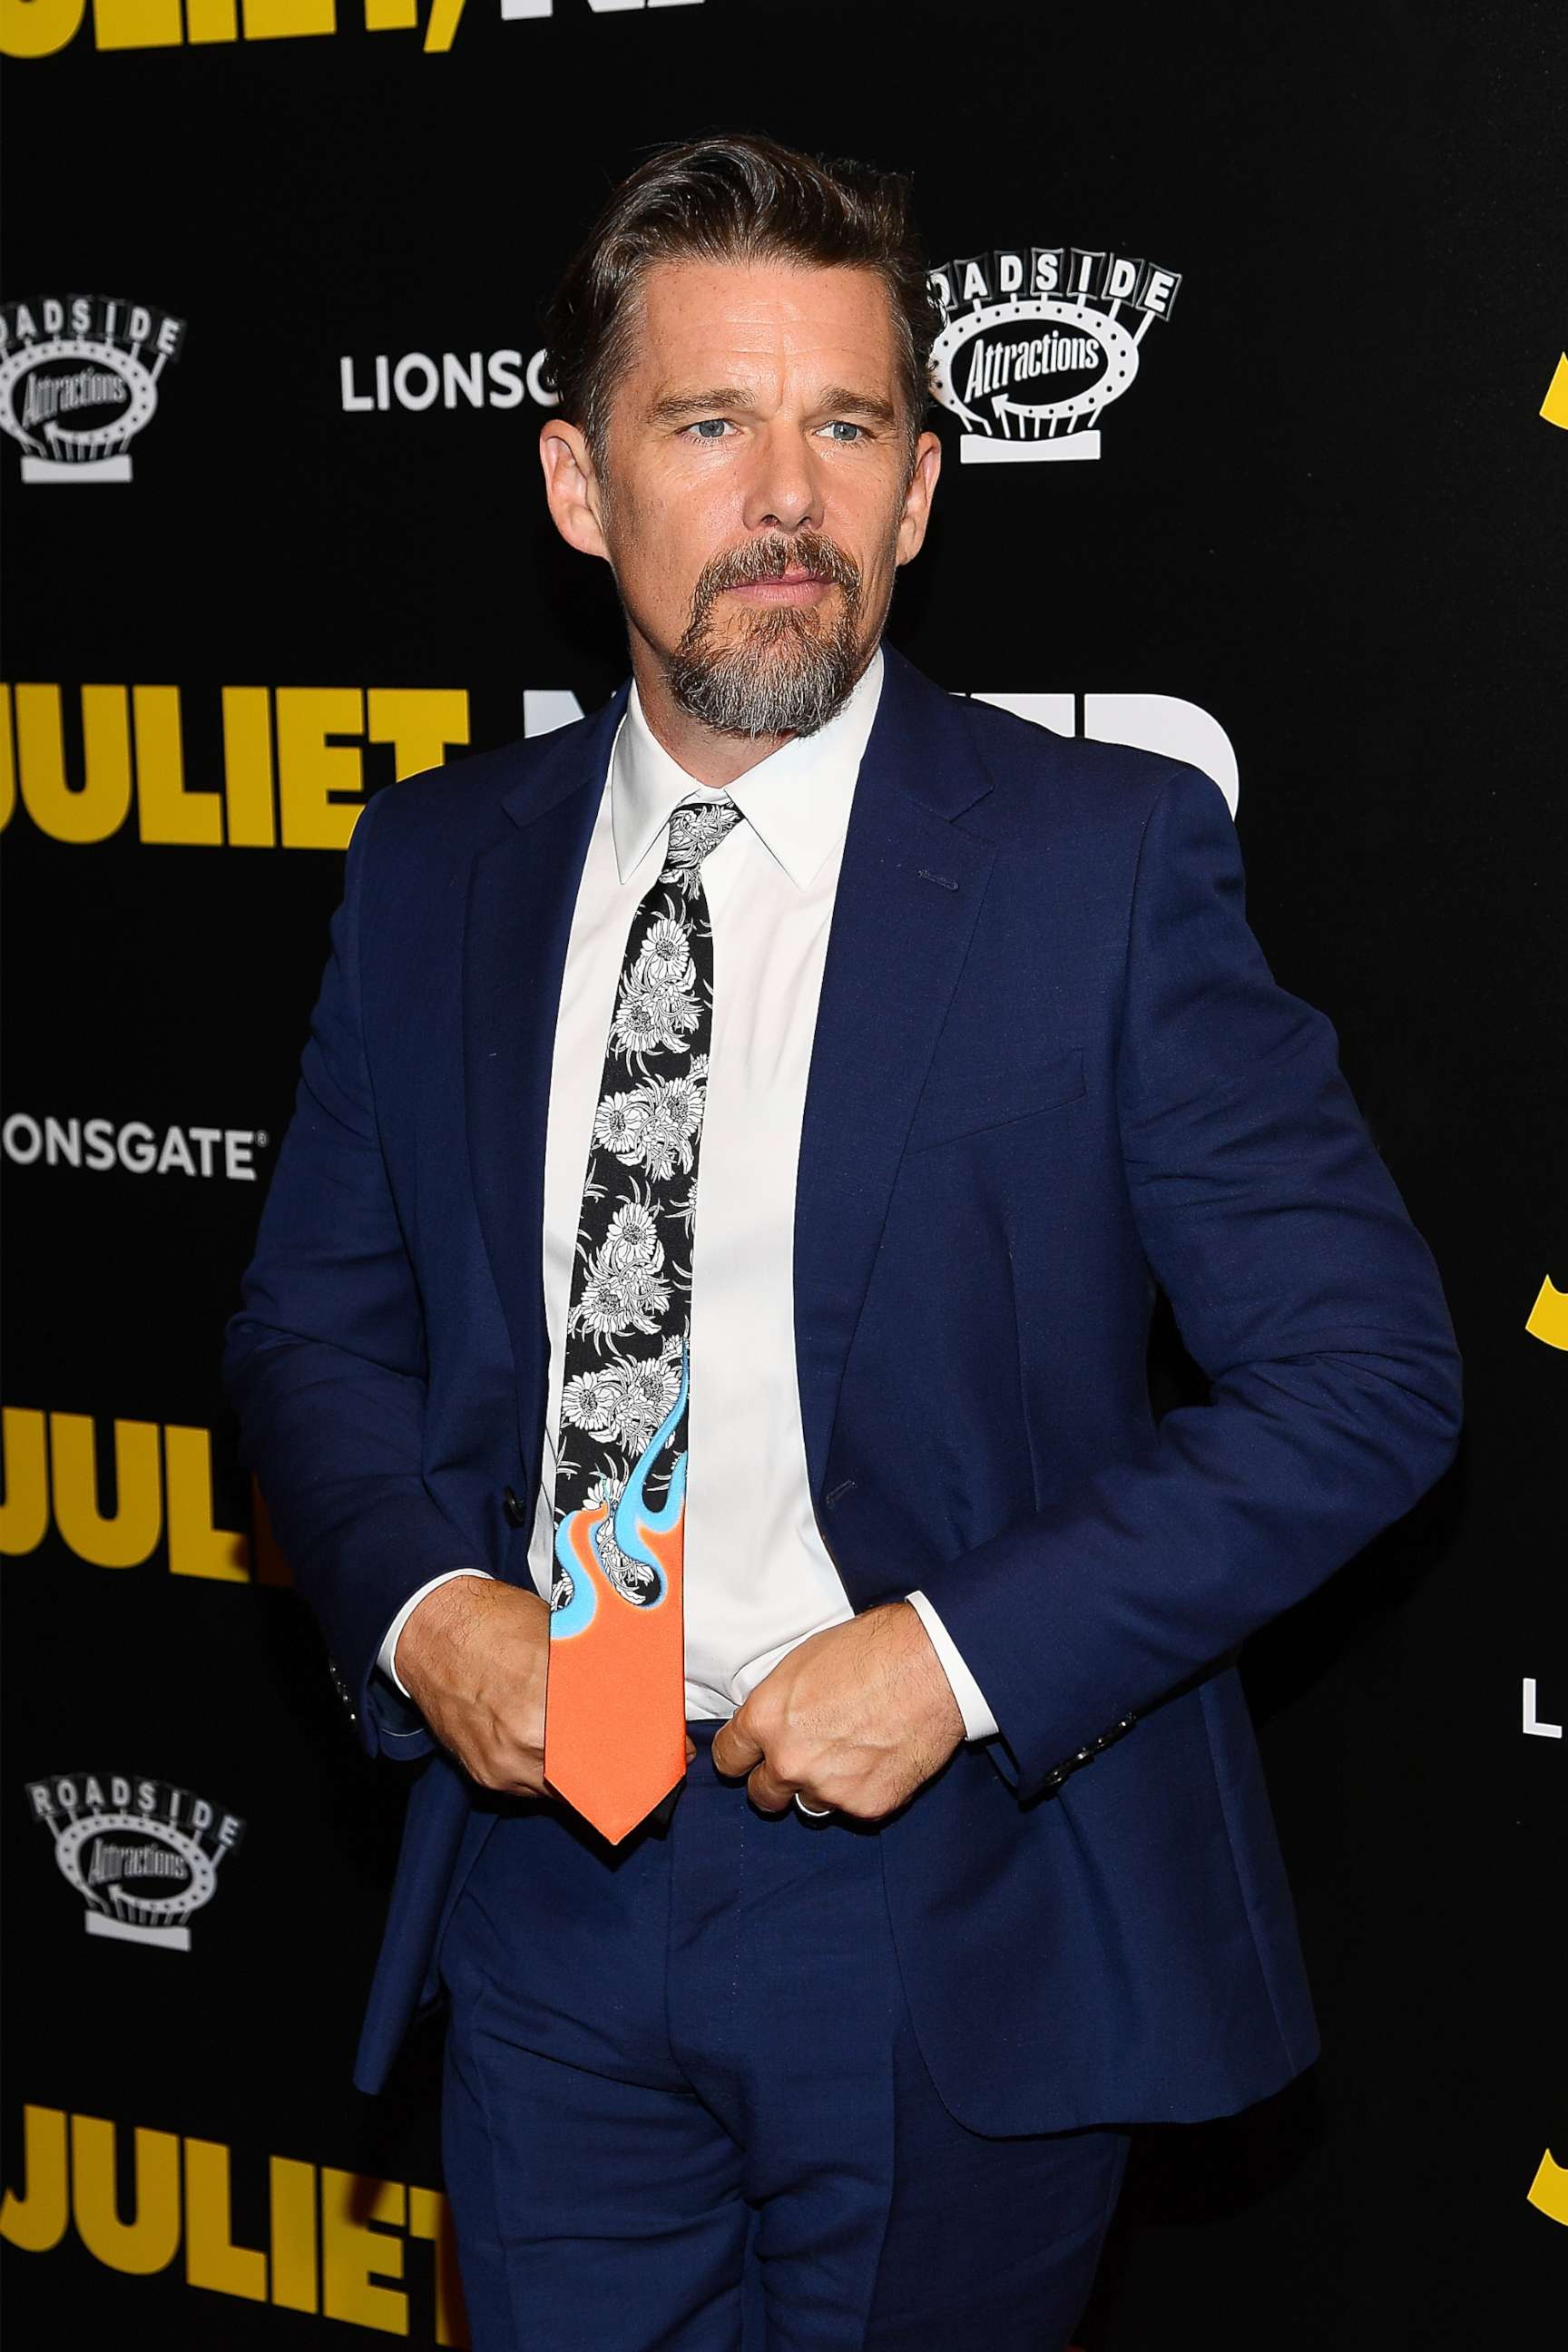 PHOTO: Ethan Hawke attends the 'Juliet, Naked' New York Premiere at Metrograph on Aug. 14, 2018 in New York City.